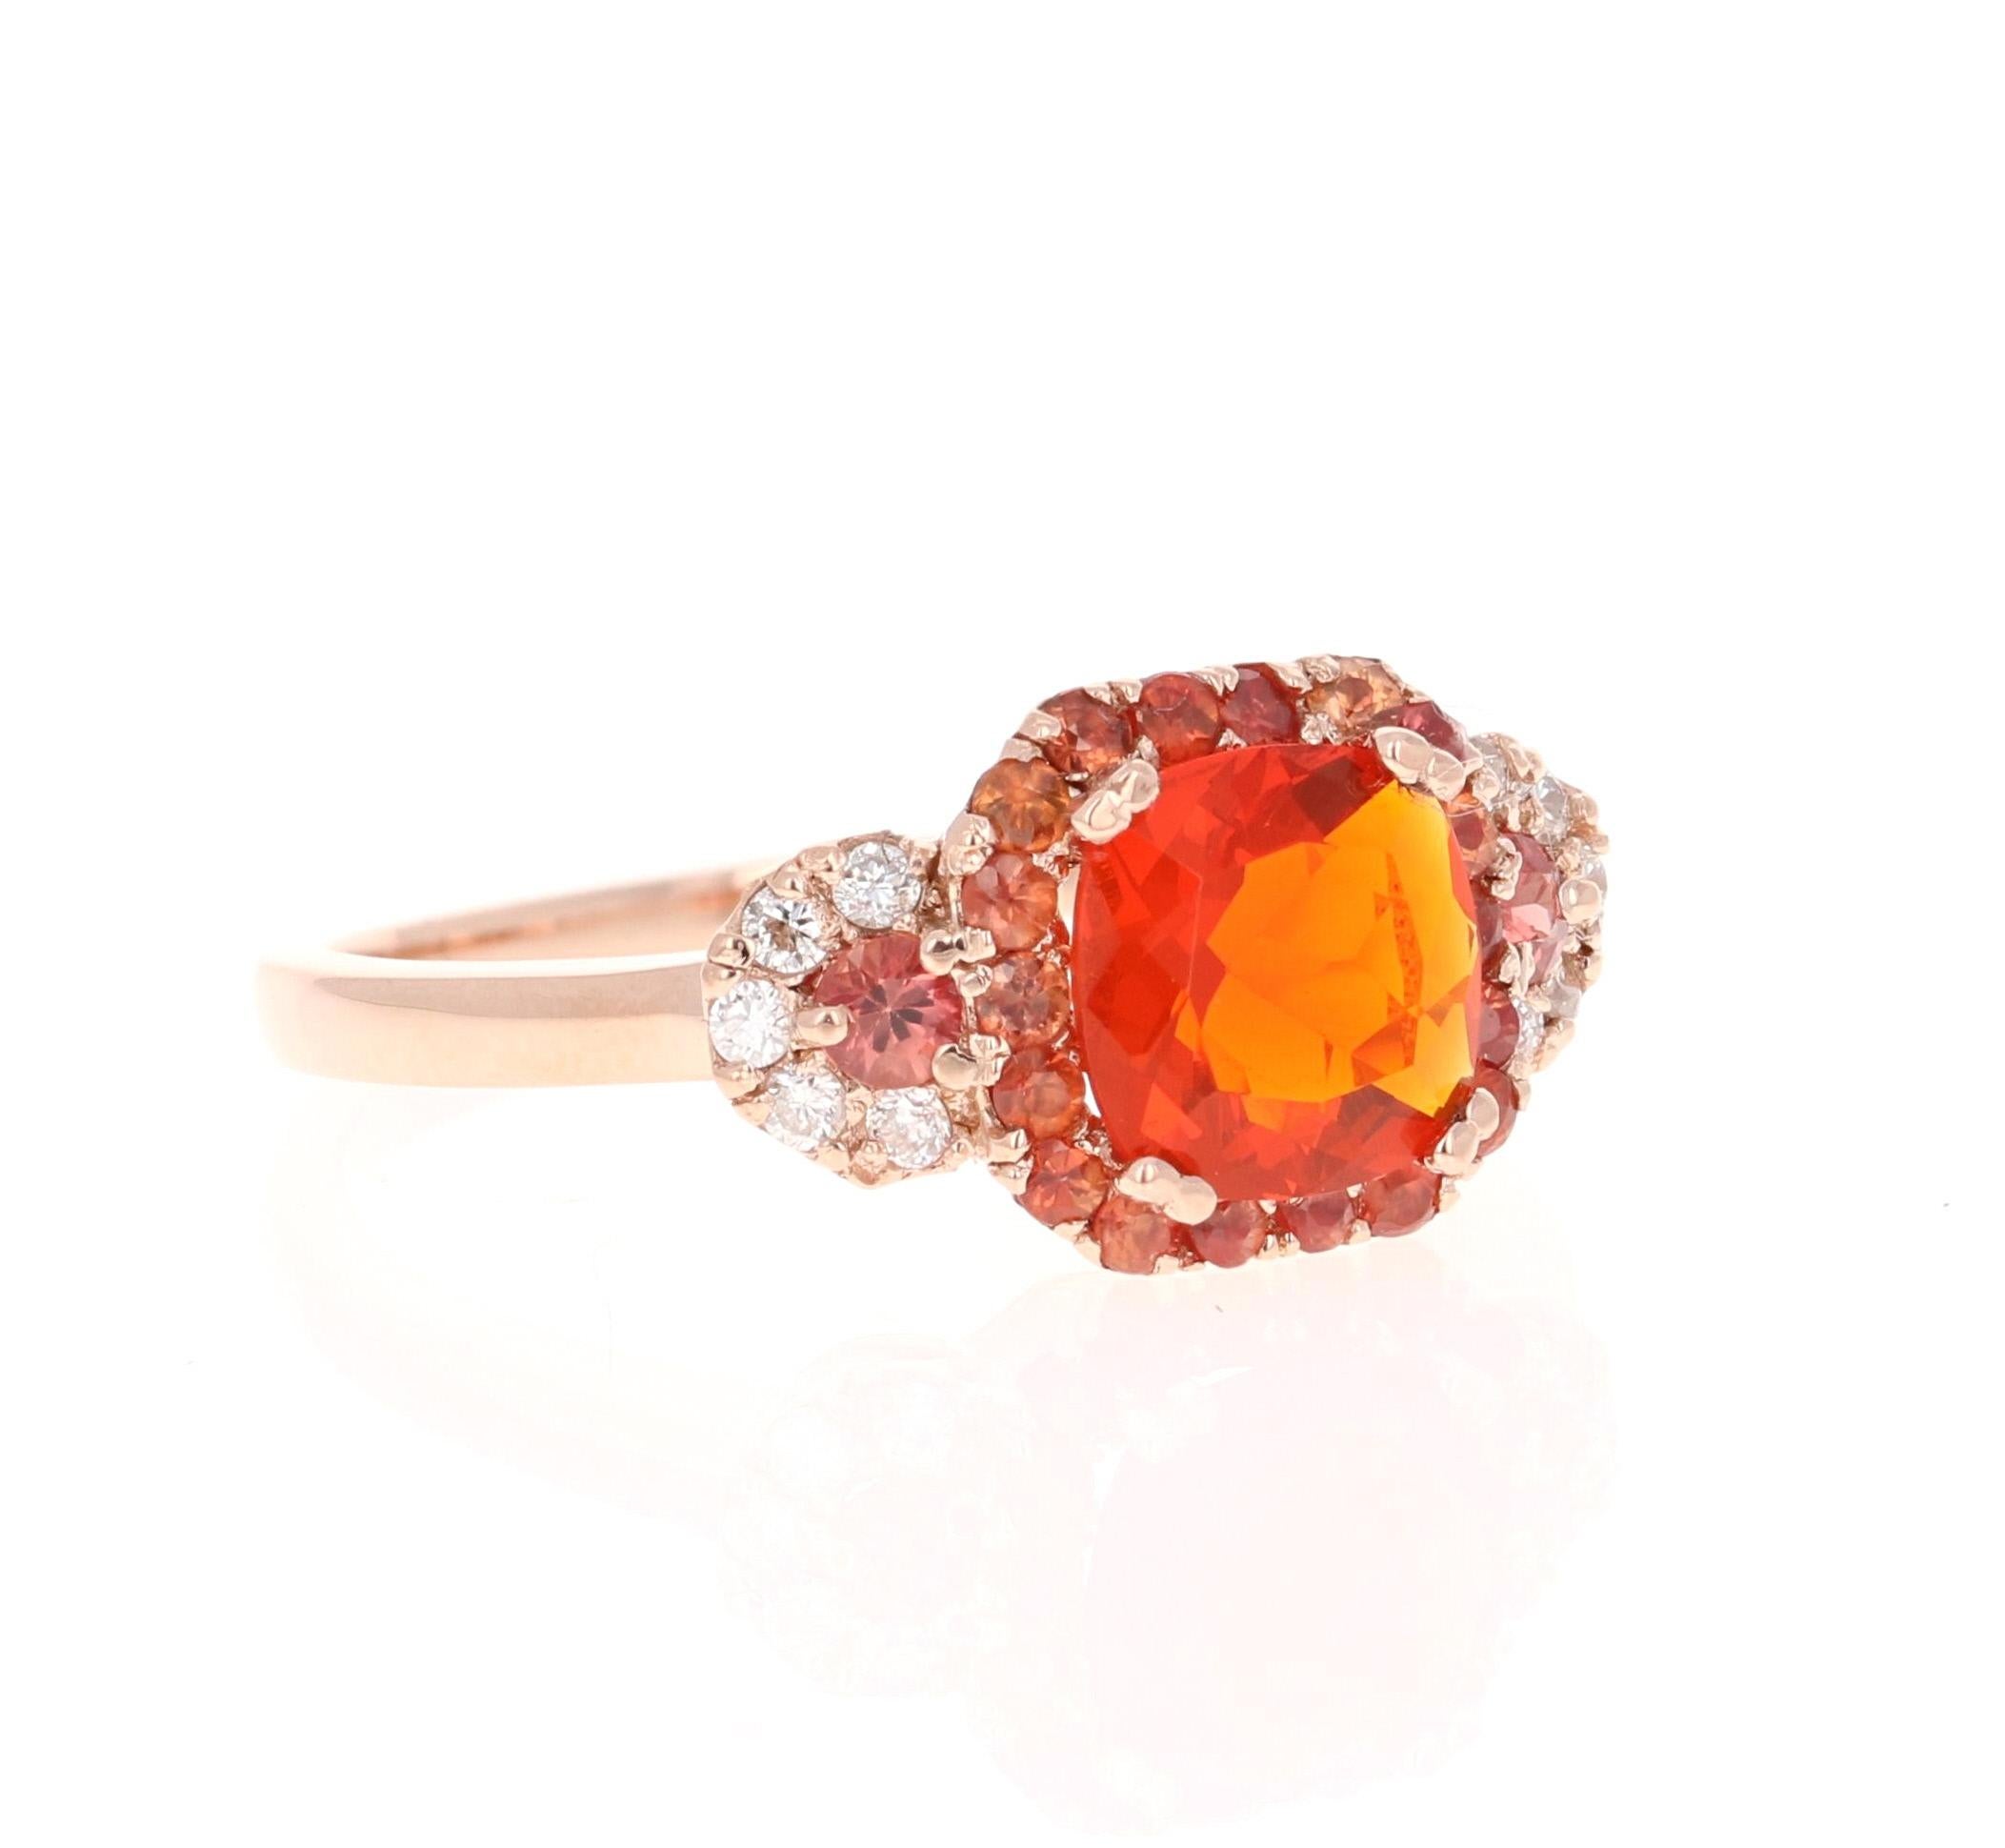 Beautiful Fire Opal and Diamond Ring. This ring has a 0.78 carat Cushion Cut Fire Opal in the center of the ring and is surrounded by a halo of 20 Orange and Red Sapphires that weigh a total of 0.46 carats and there are 10 Round Cut Diamonds that